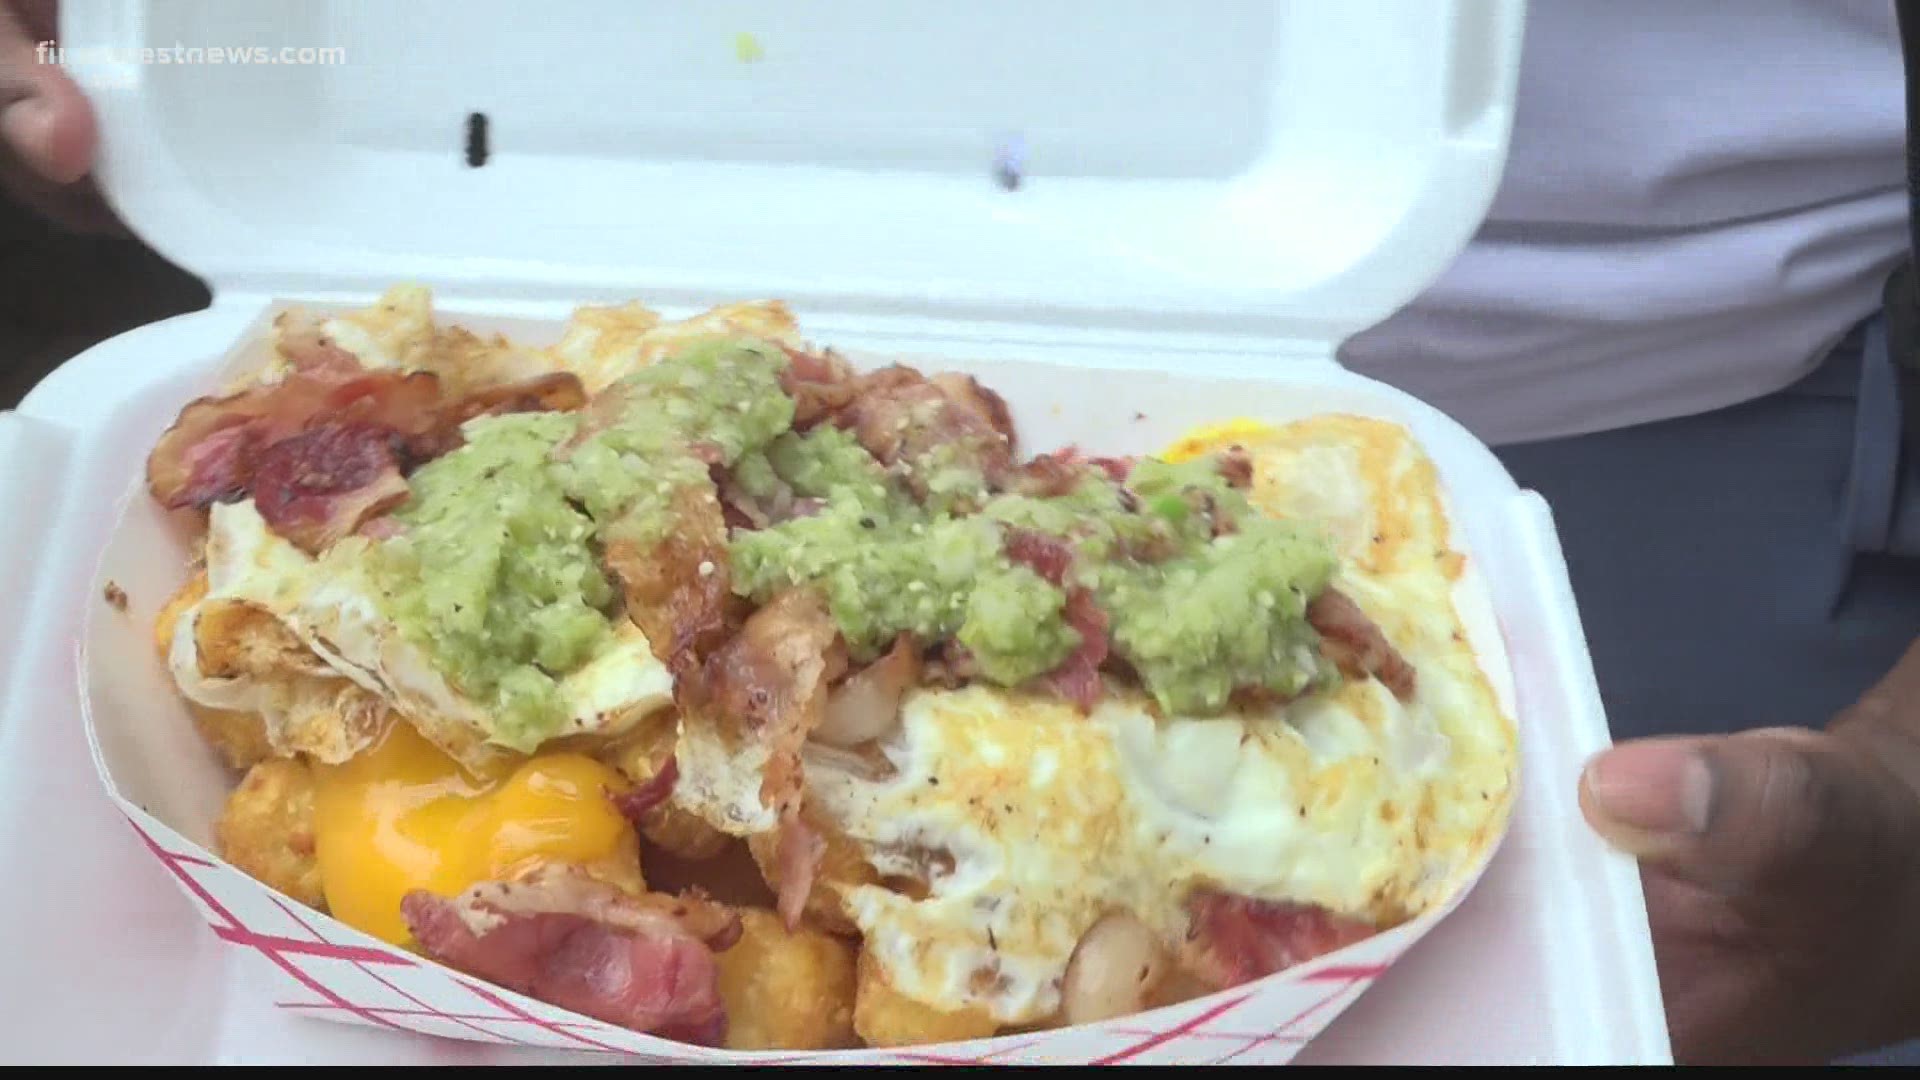 The Fried Egg Food Truck serves up so much more than just breakfast.